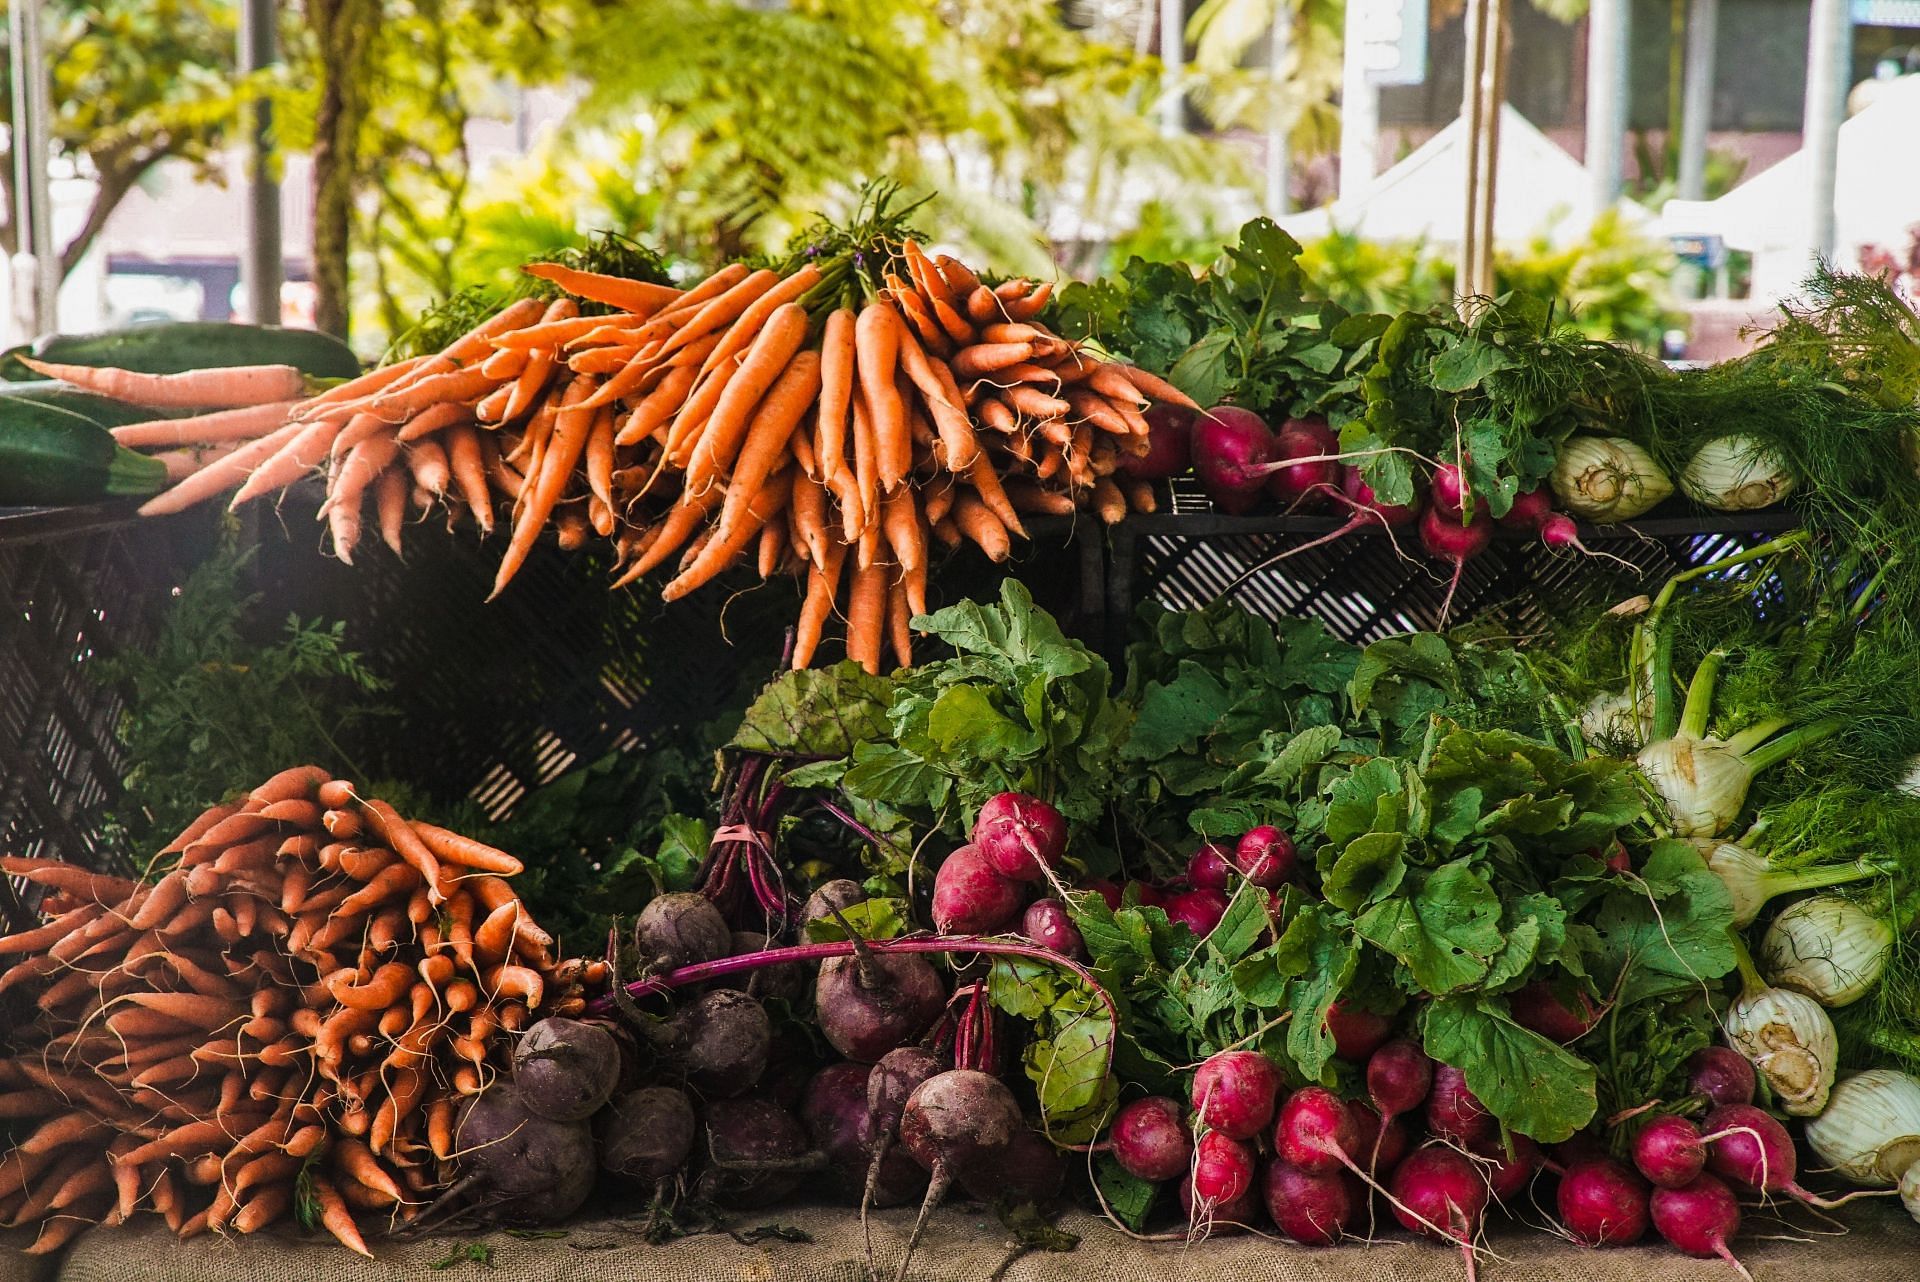 Carrots, spinach, sweet potatoes, broccoli, and leafy green vegetables promote eye health (Image via Pexels)